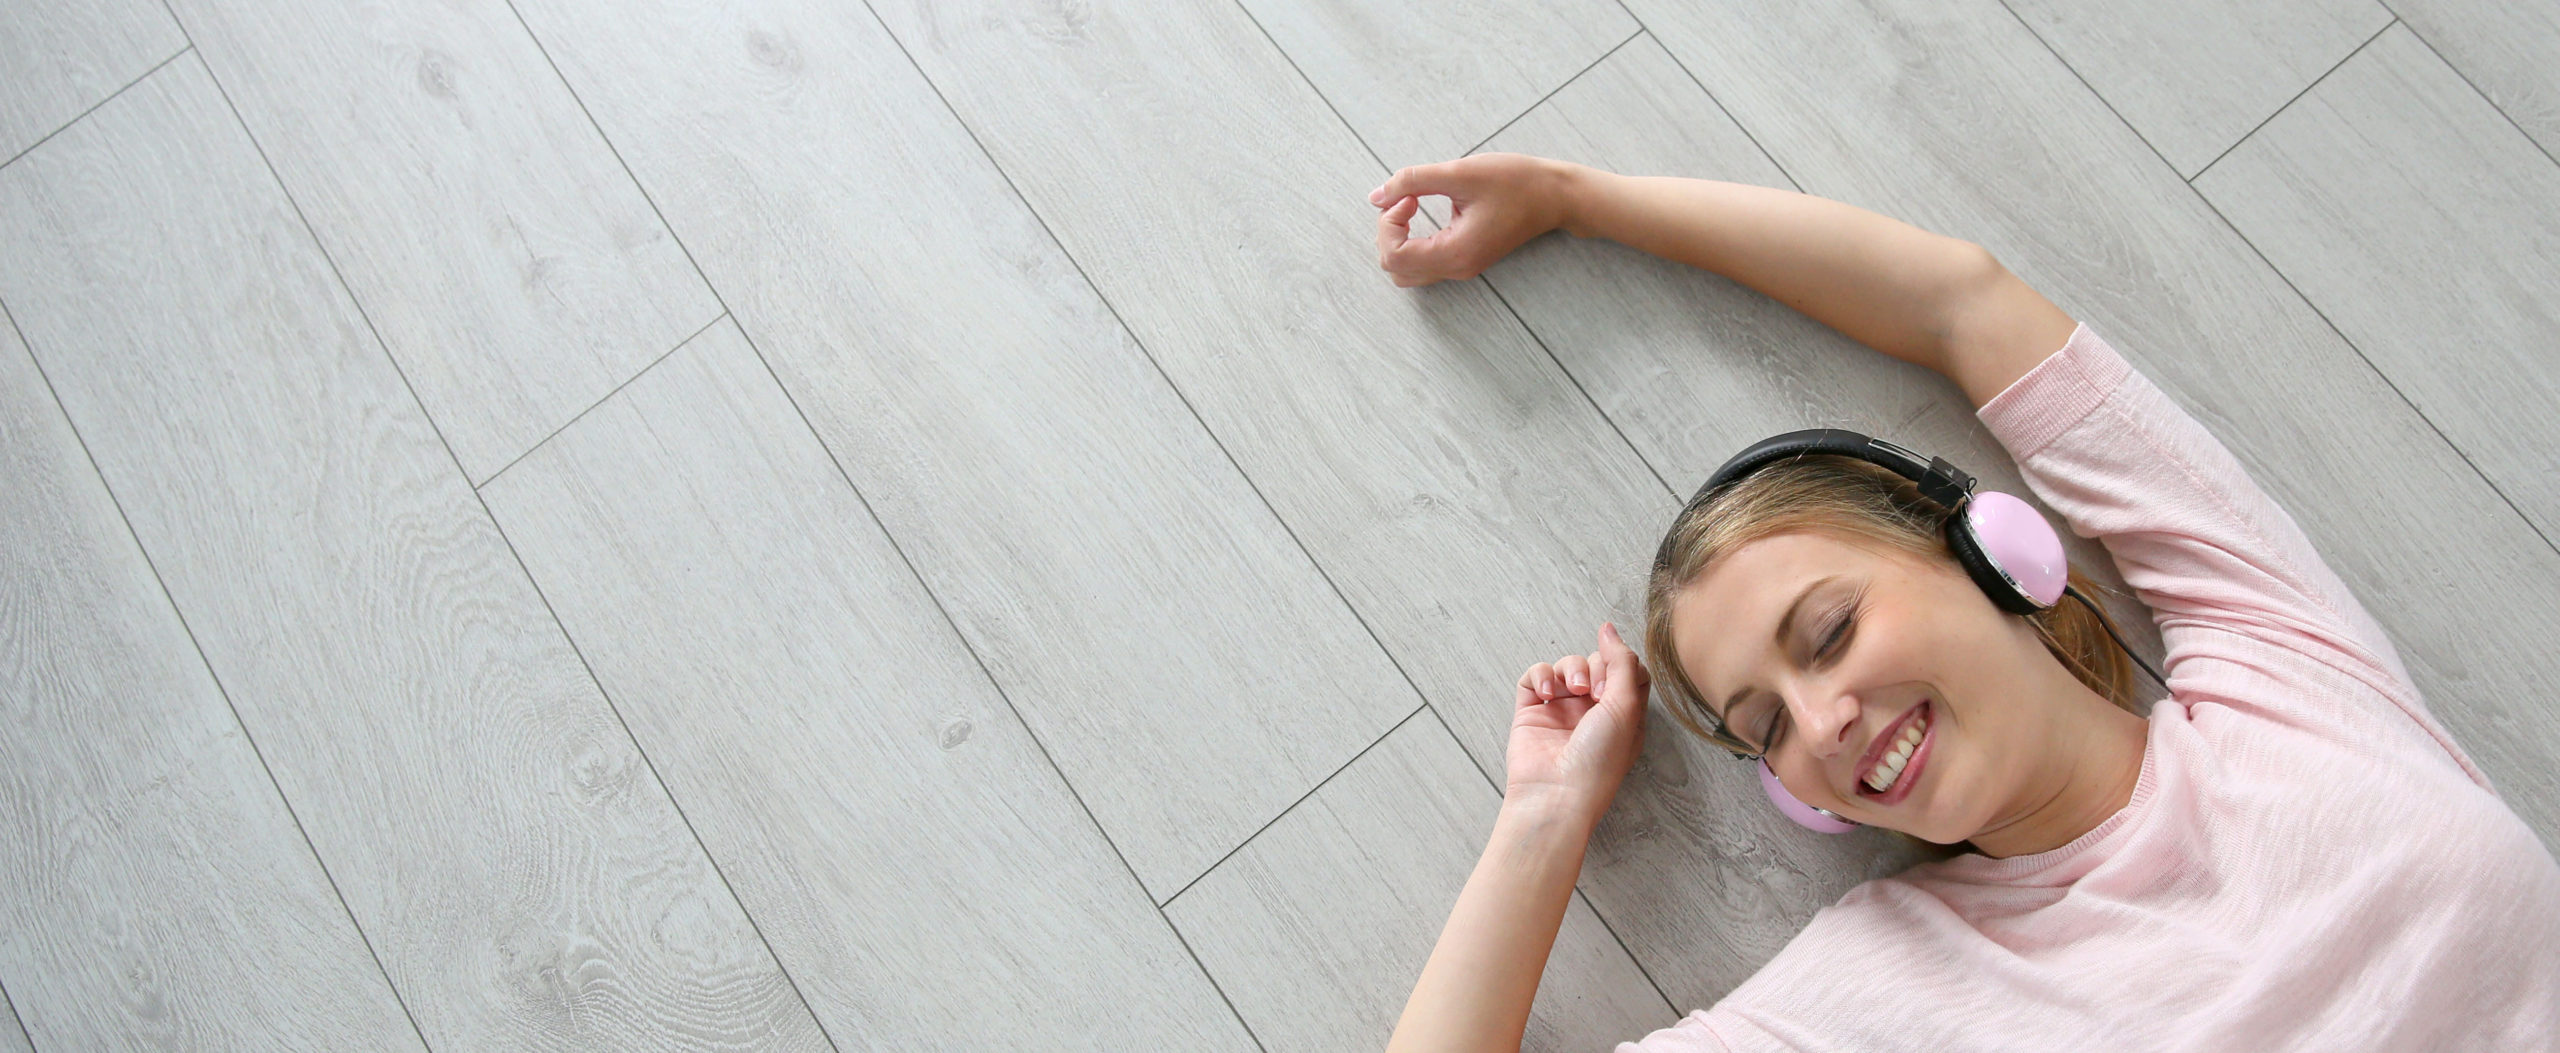 Blond girl relaxing on wooden flooring with headphones on